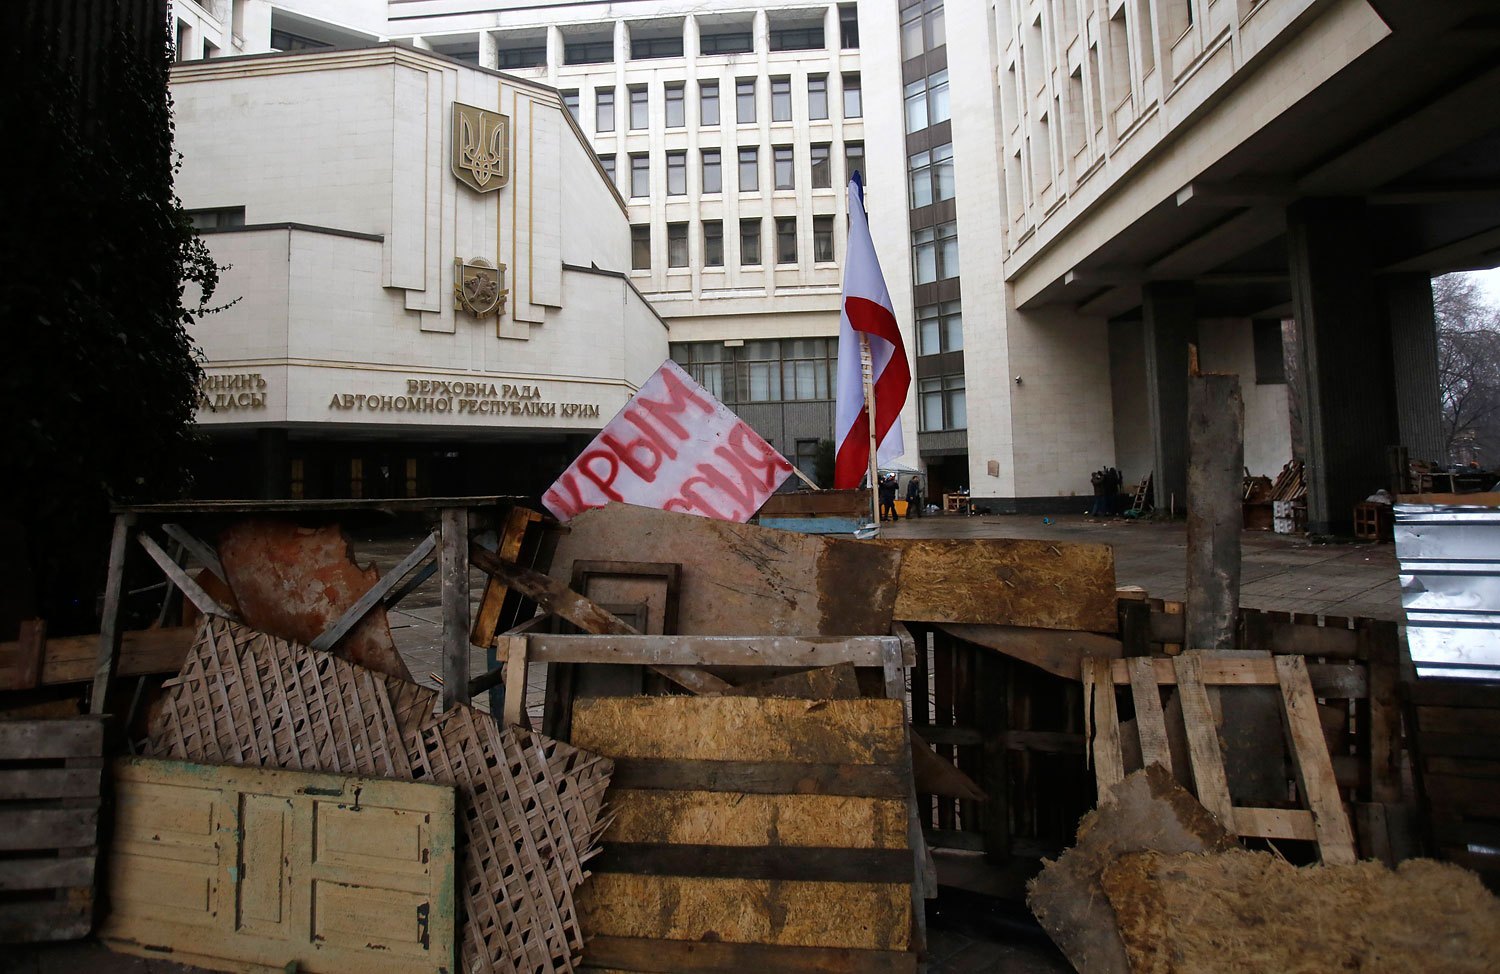 Barricades block the entrance to government buildings in Simferopol, Crimea, with a banner that reads "Crimea Russia," Feb. 27, 2014.